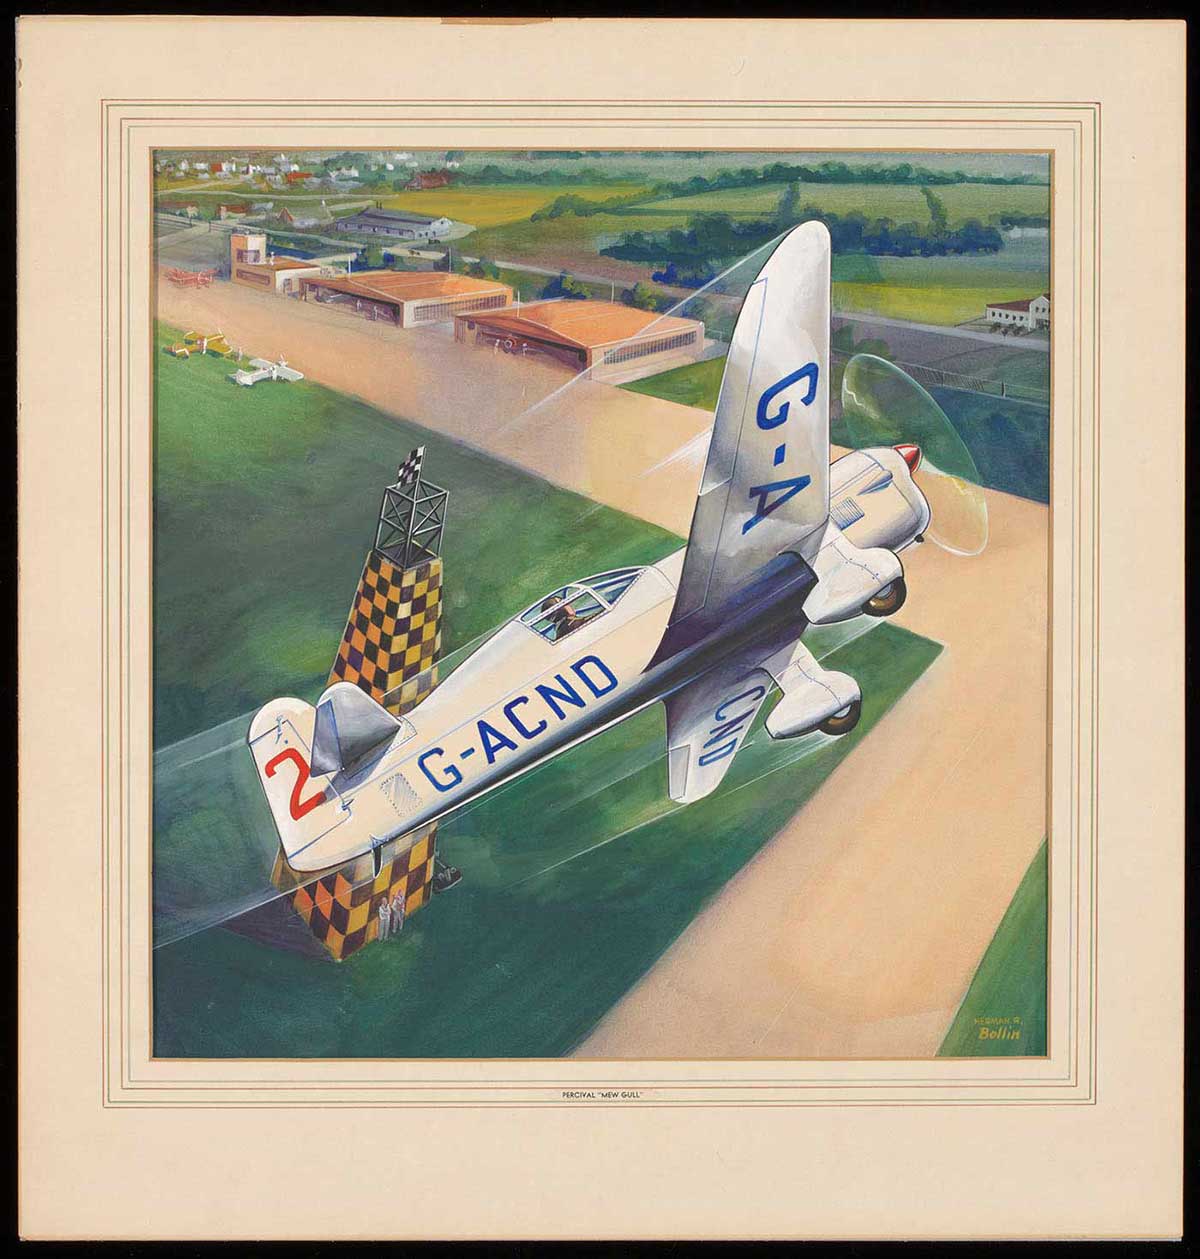 A painting showing a monoplane in flight above an airfield. The plane, registered 'GA-CND' is rounding a marker. - click to view larger image